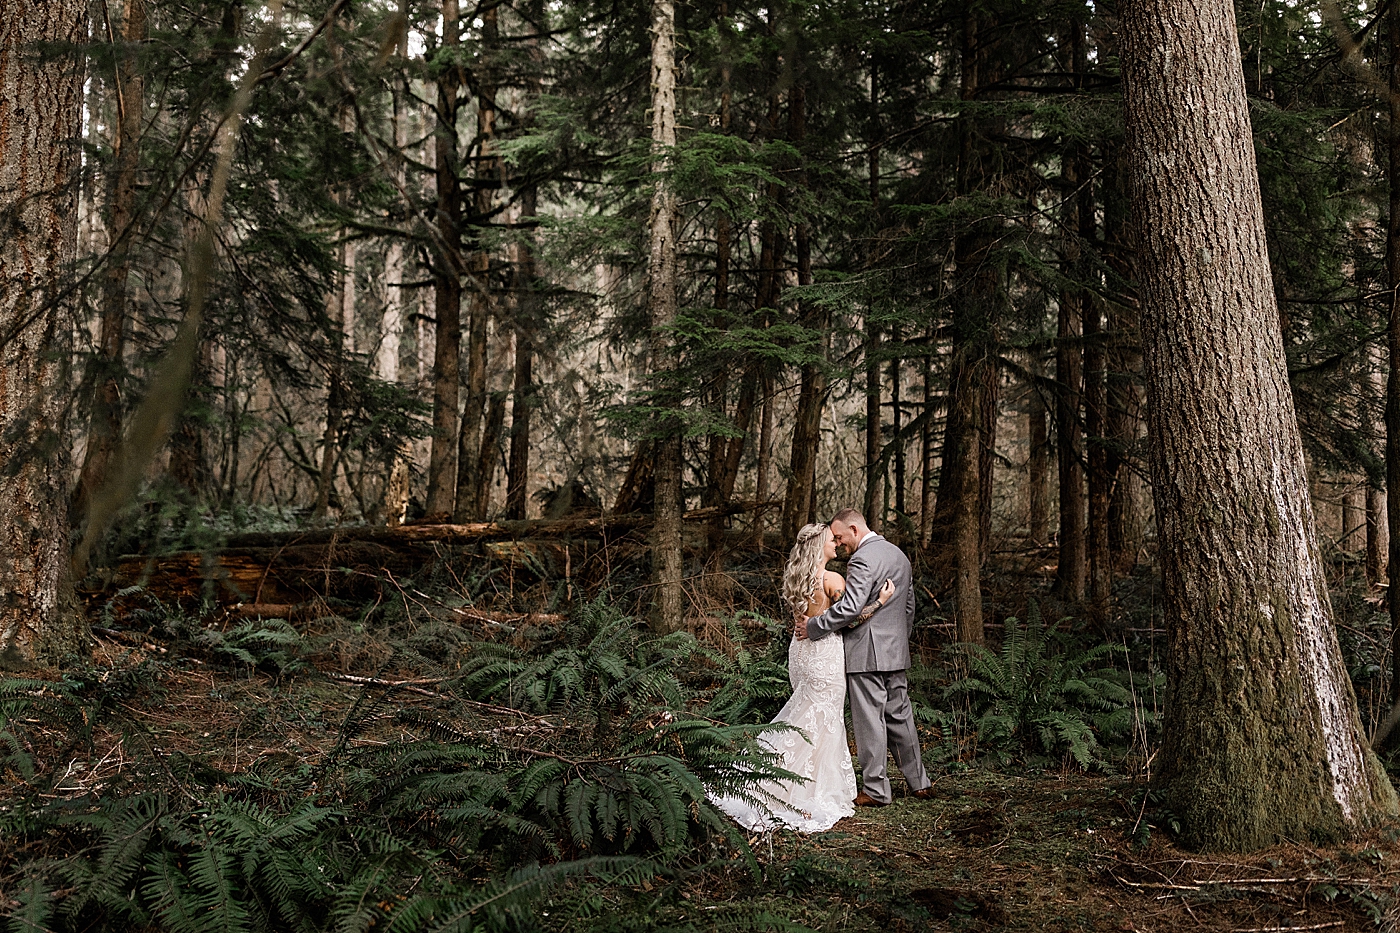 Bride and groom portraits. Photo by Megan Montalvo Photography.